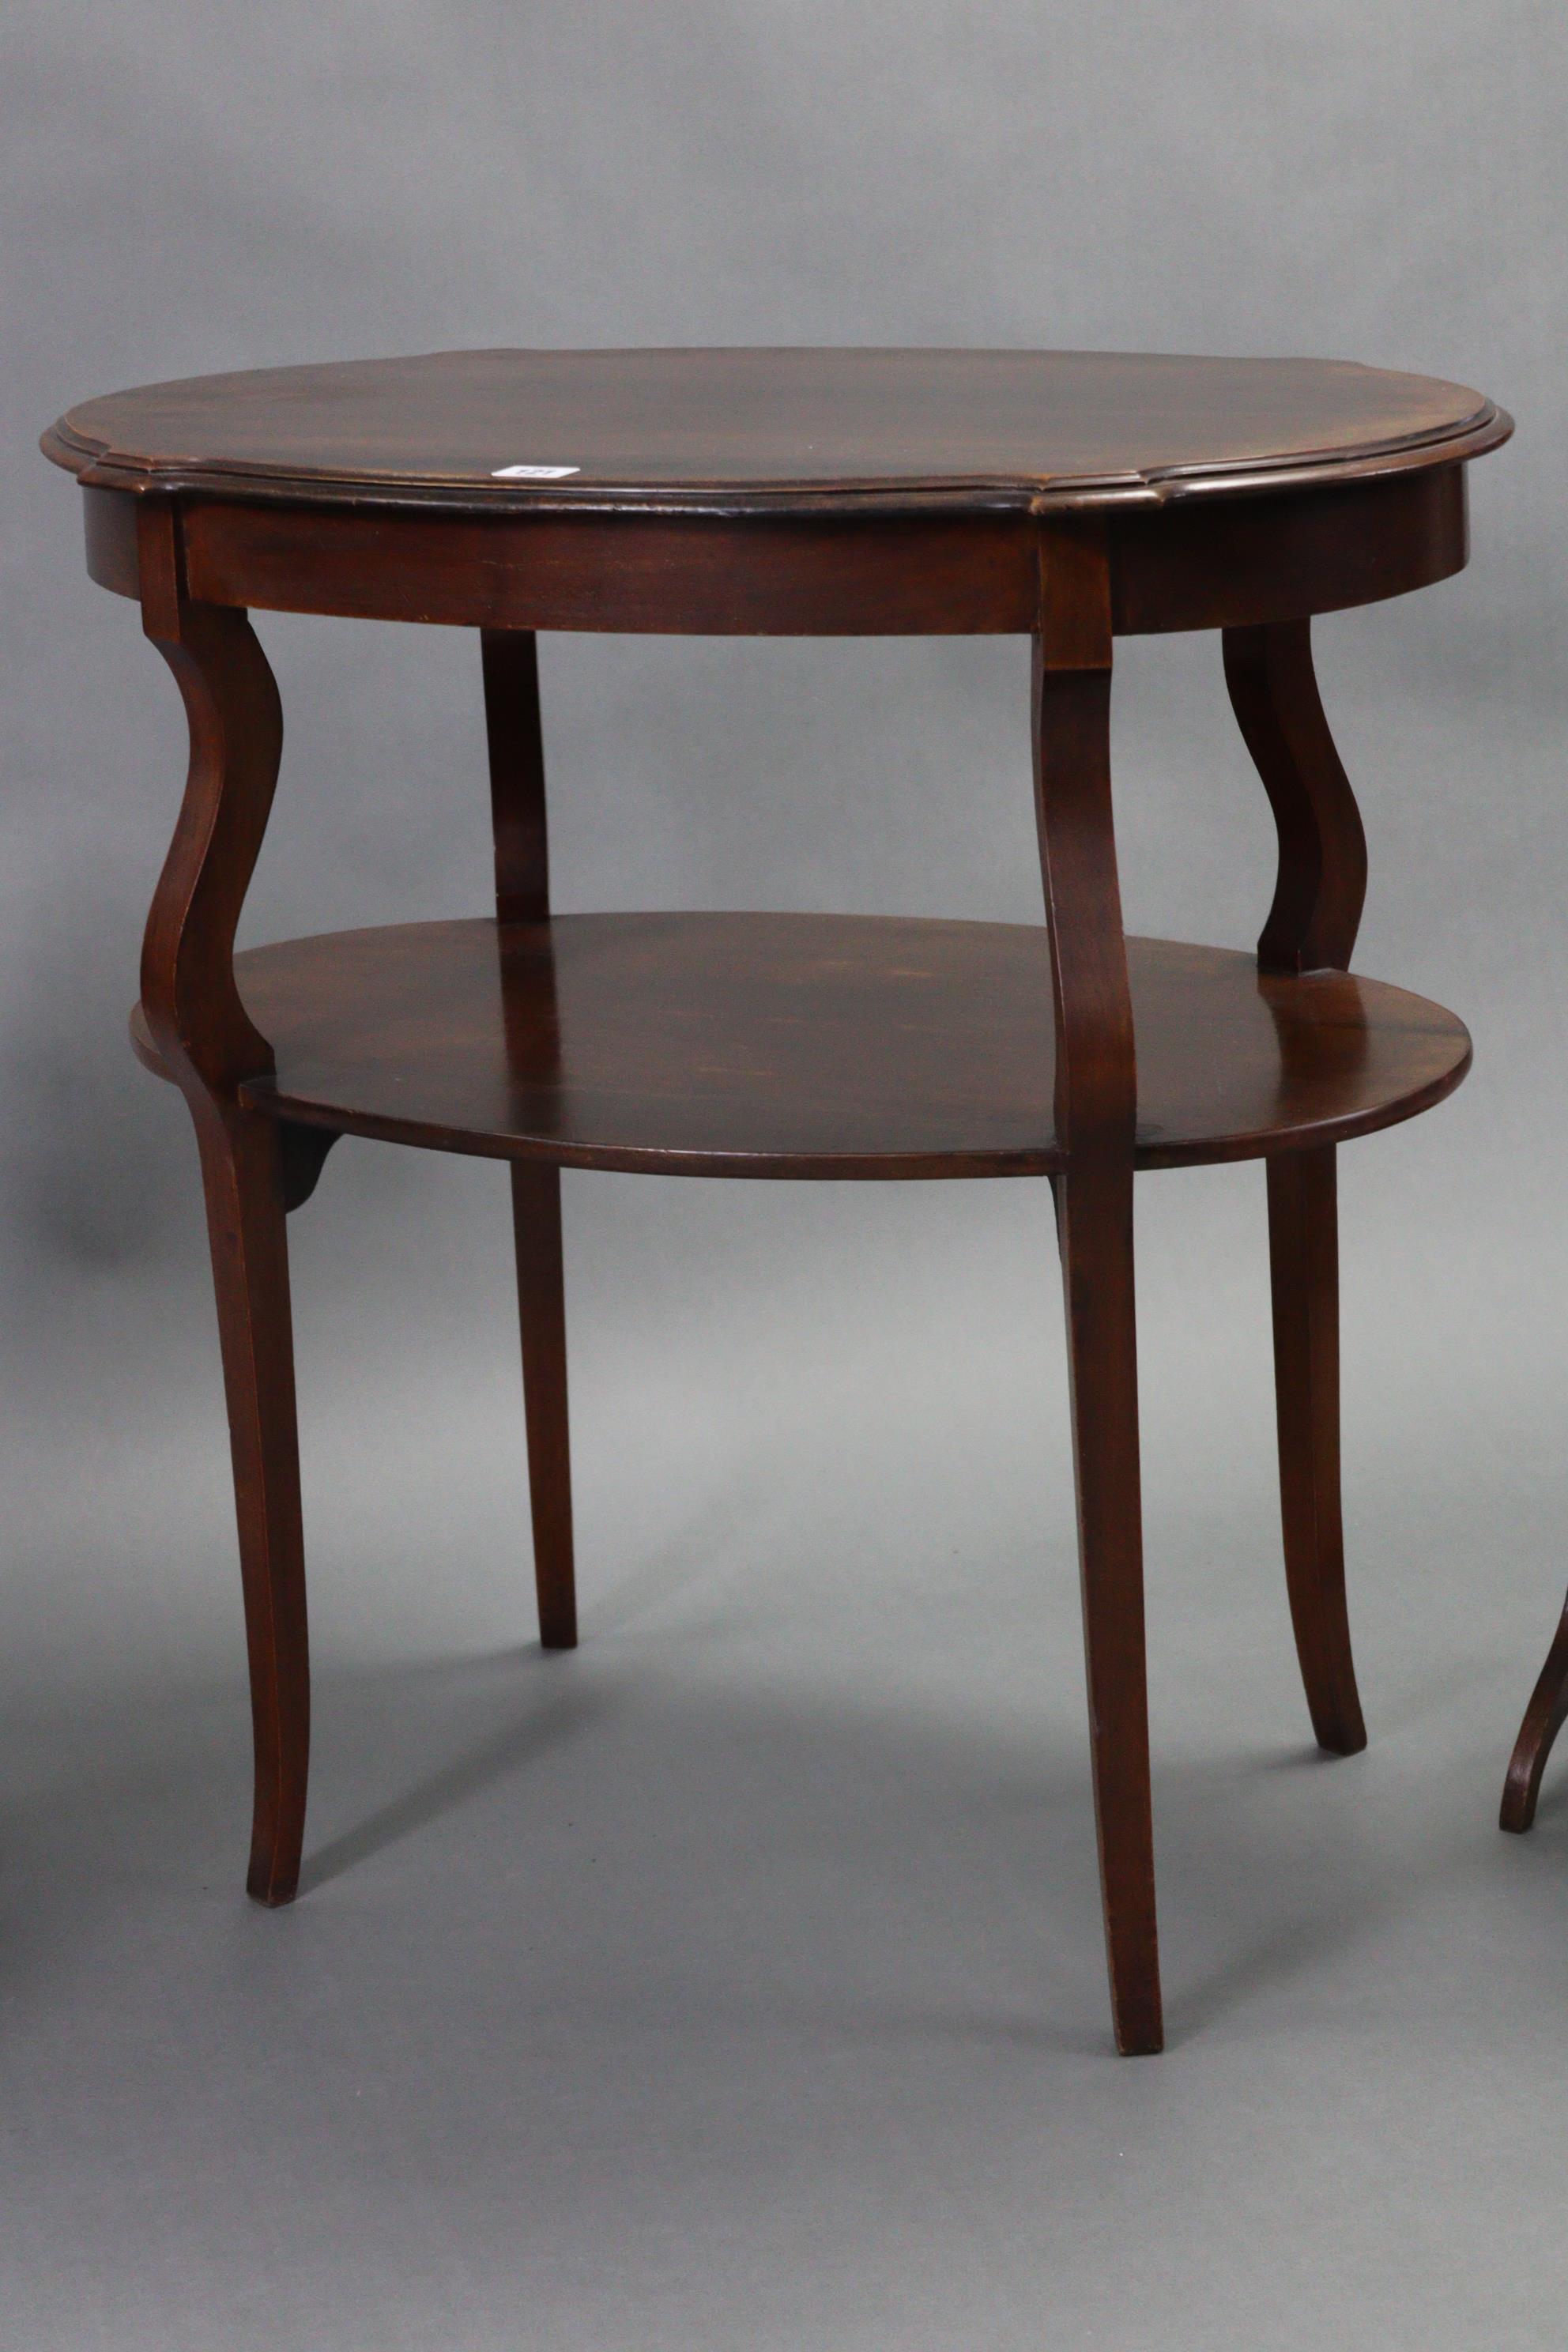 An Edwardian mahogany oval occasional table on four cabriole legs with open undertier, 27” wide; - Image 3 of 6